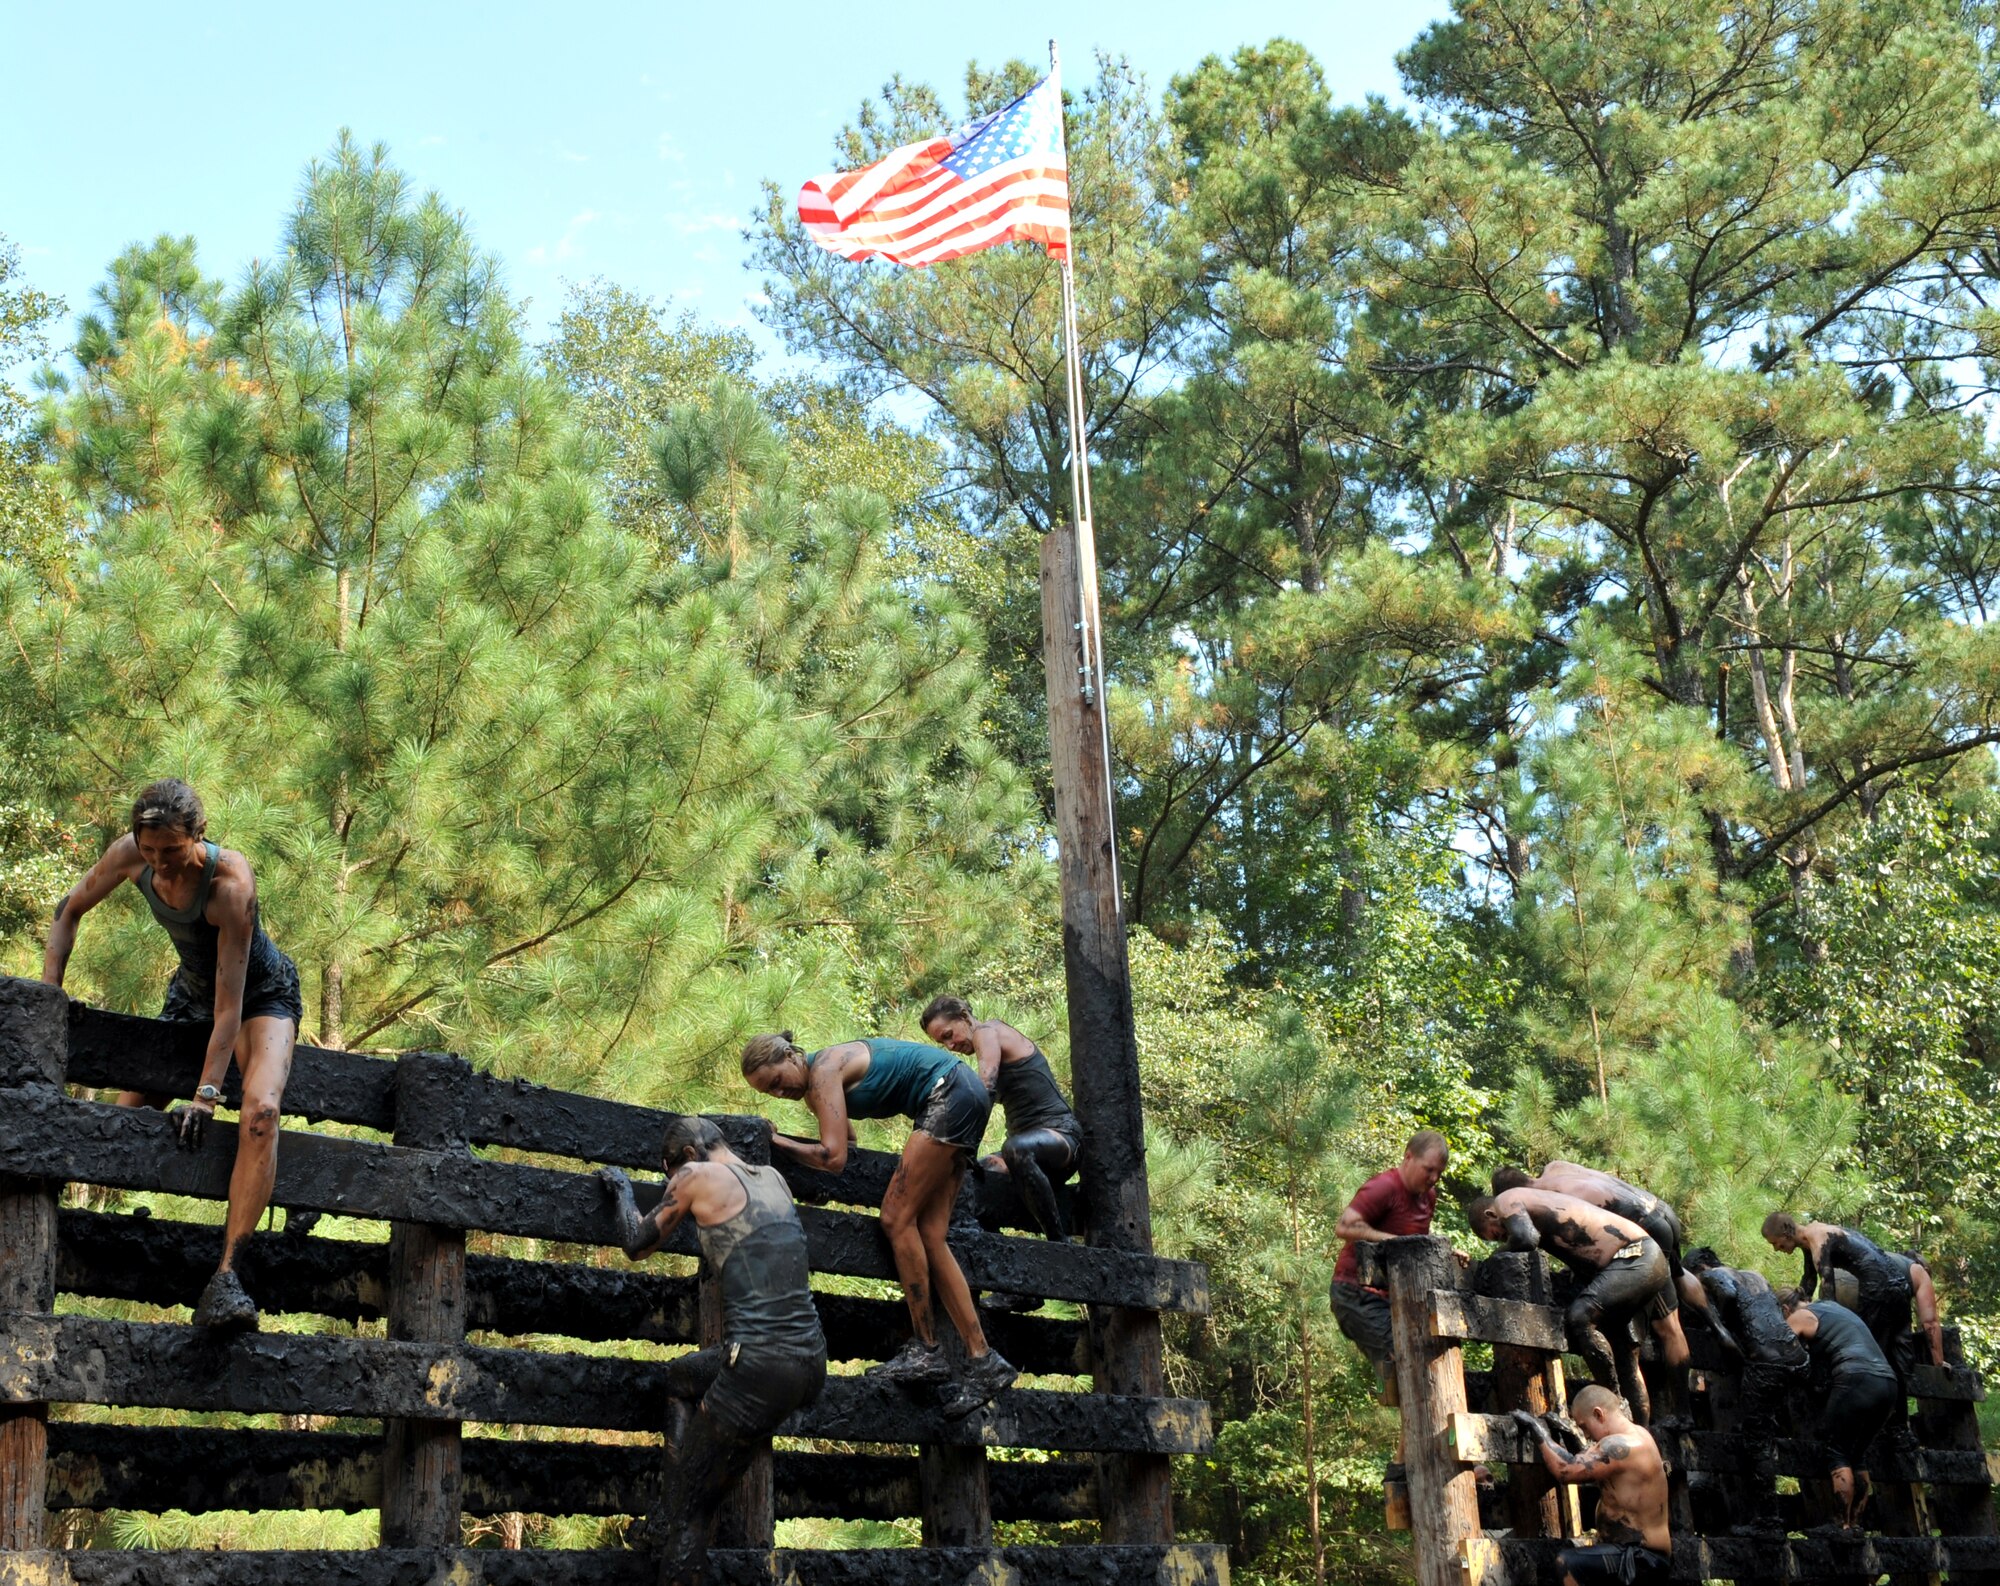 100925-F-4406D-118 SHAW AIR FORCE BASE, S.C.- Contestants complete the "Wall Climb," an obstacle that challenges the contestants to climb up a fifteen foot wall and once at the top, they climb down, at the 17th Annual United States Marine Corps Mud Run in Gaston, S.C., Sept. 25, 2010. The USMC Mud Run is held annually to raise money for Marines and their families who have been killed on duty. Its profits also go towards scholarships and local events which promote the Marine Corps in the community. (U.S. Air Force photo/Airman 1st Class Tabatha L. Duarte (Released)